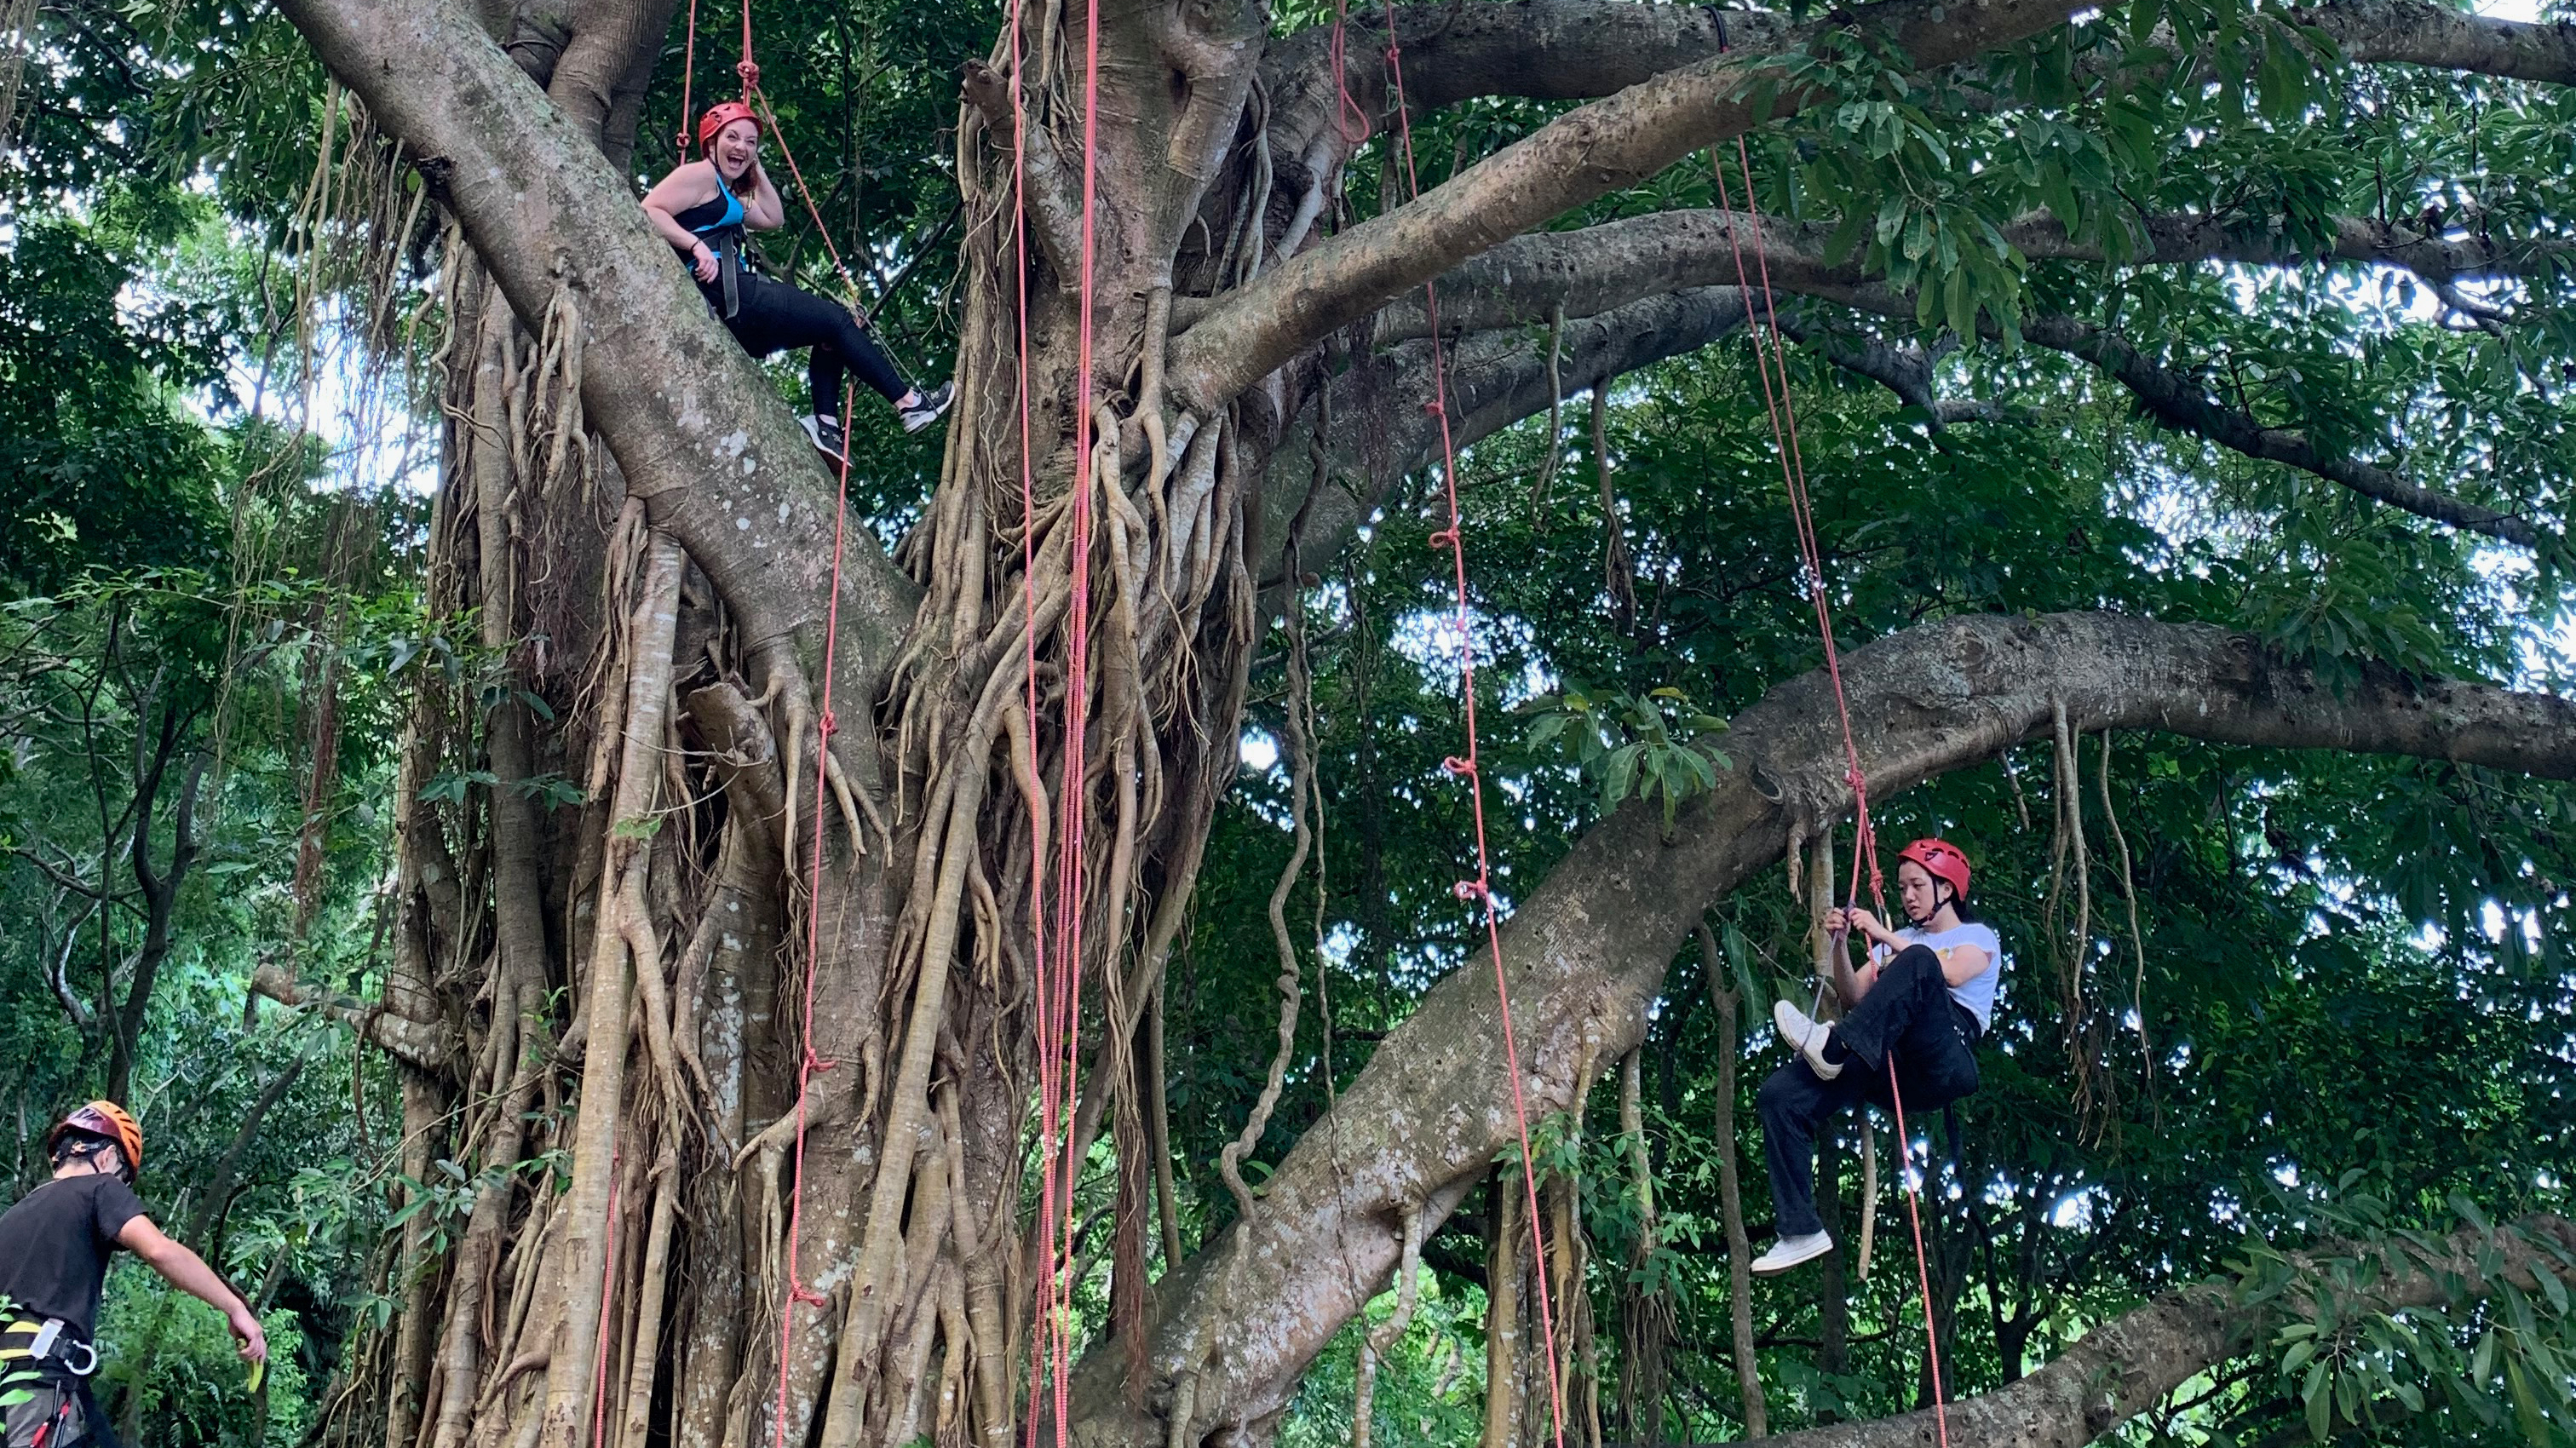 Students have used ropes to ascend high into a tree